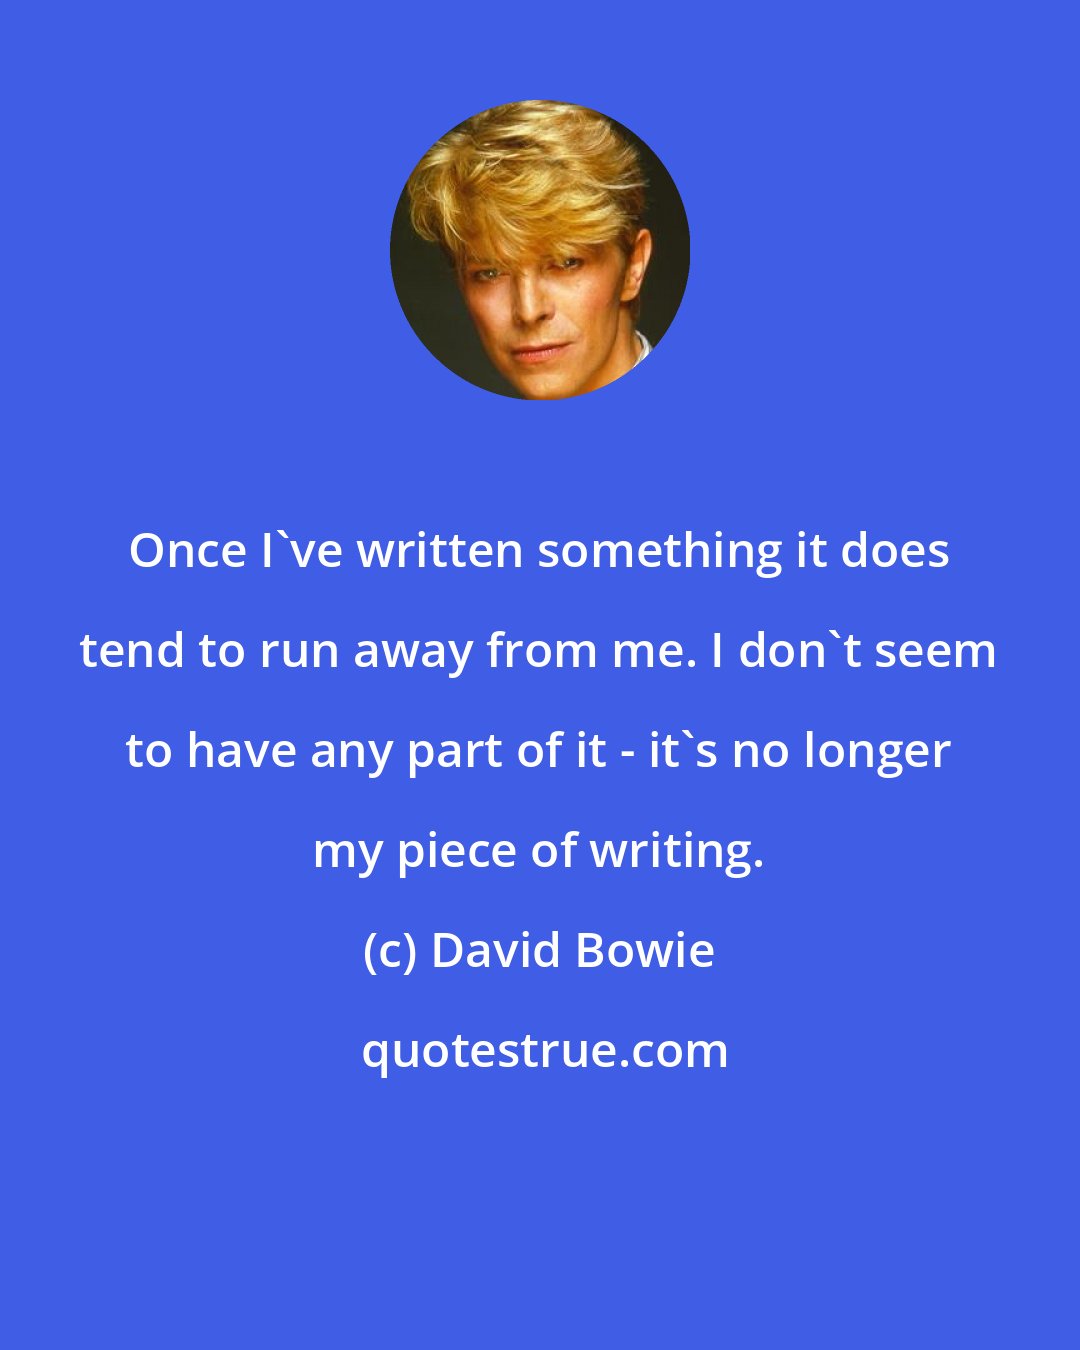 David Bowie: Once I've written something it does tend to run away from me. I don't seem to have any part of it - it's no longer my piece of writing.